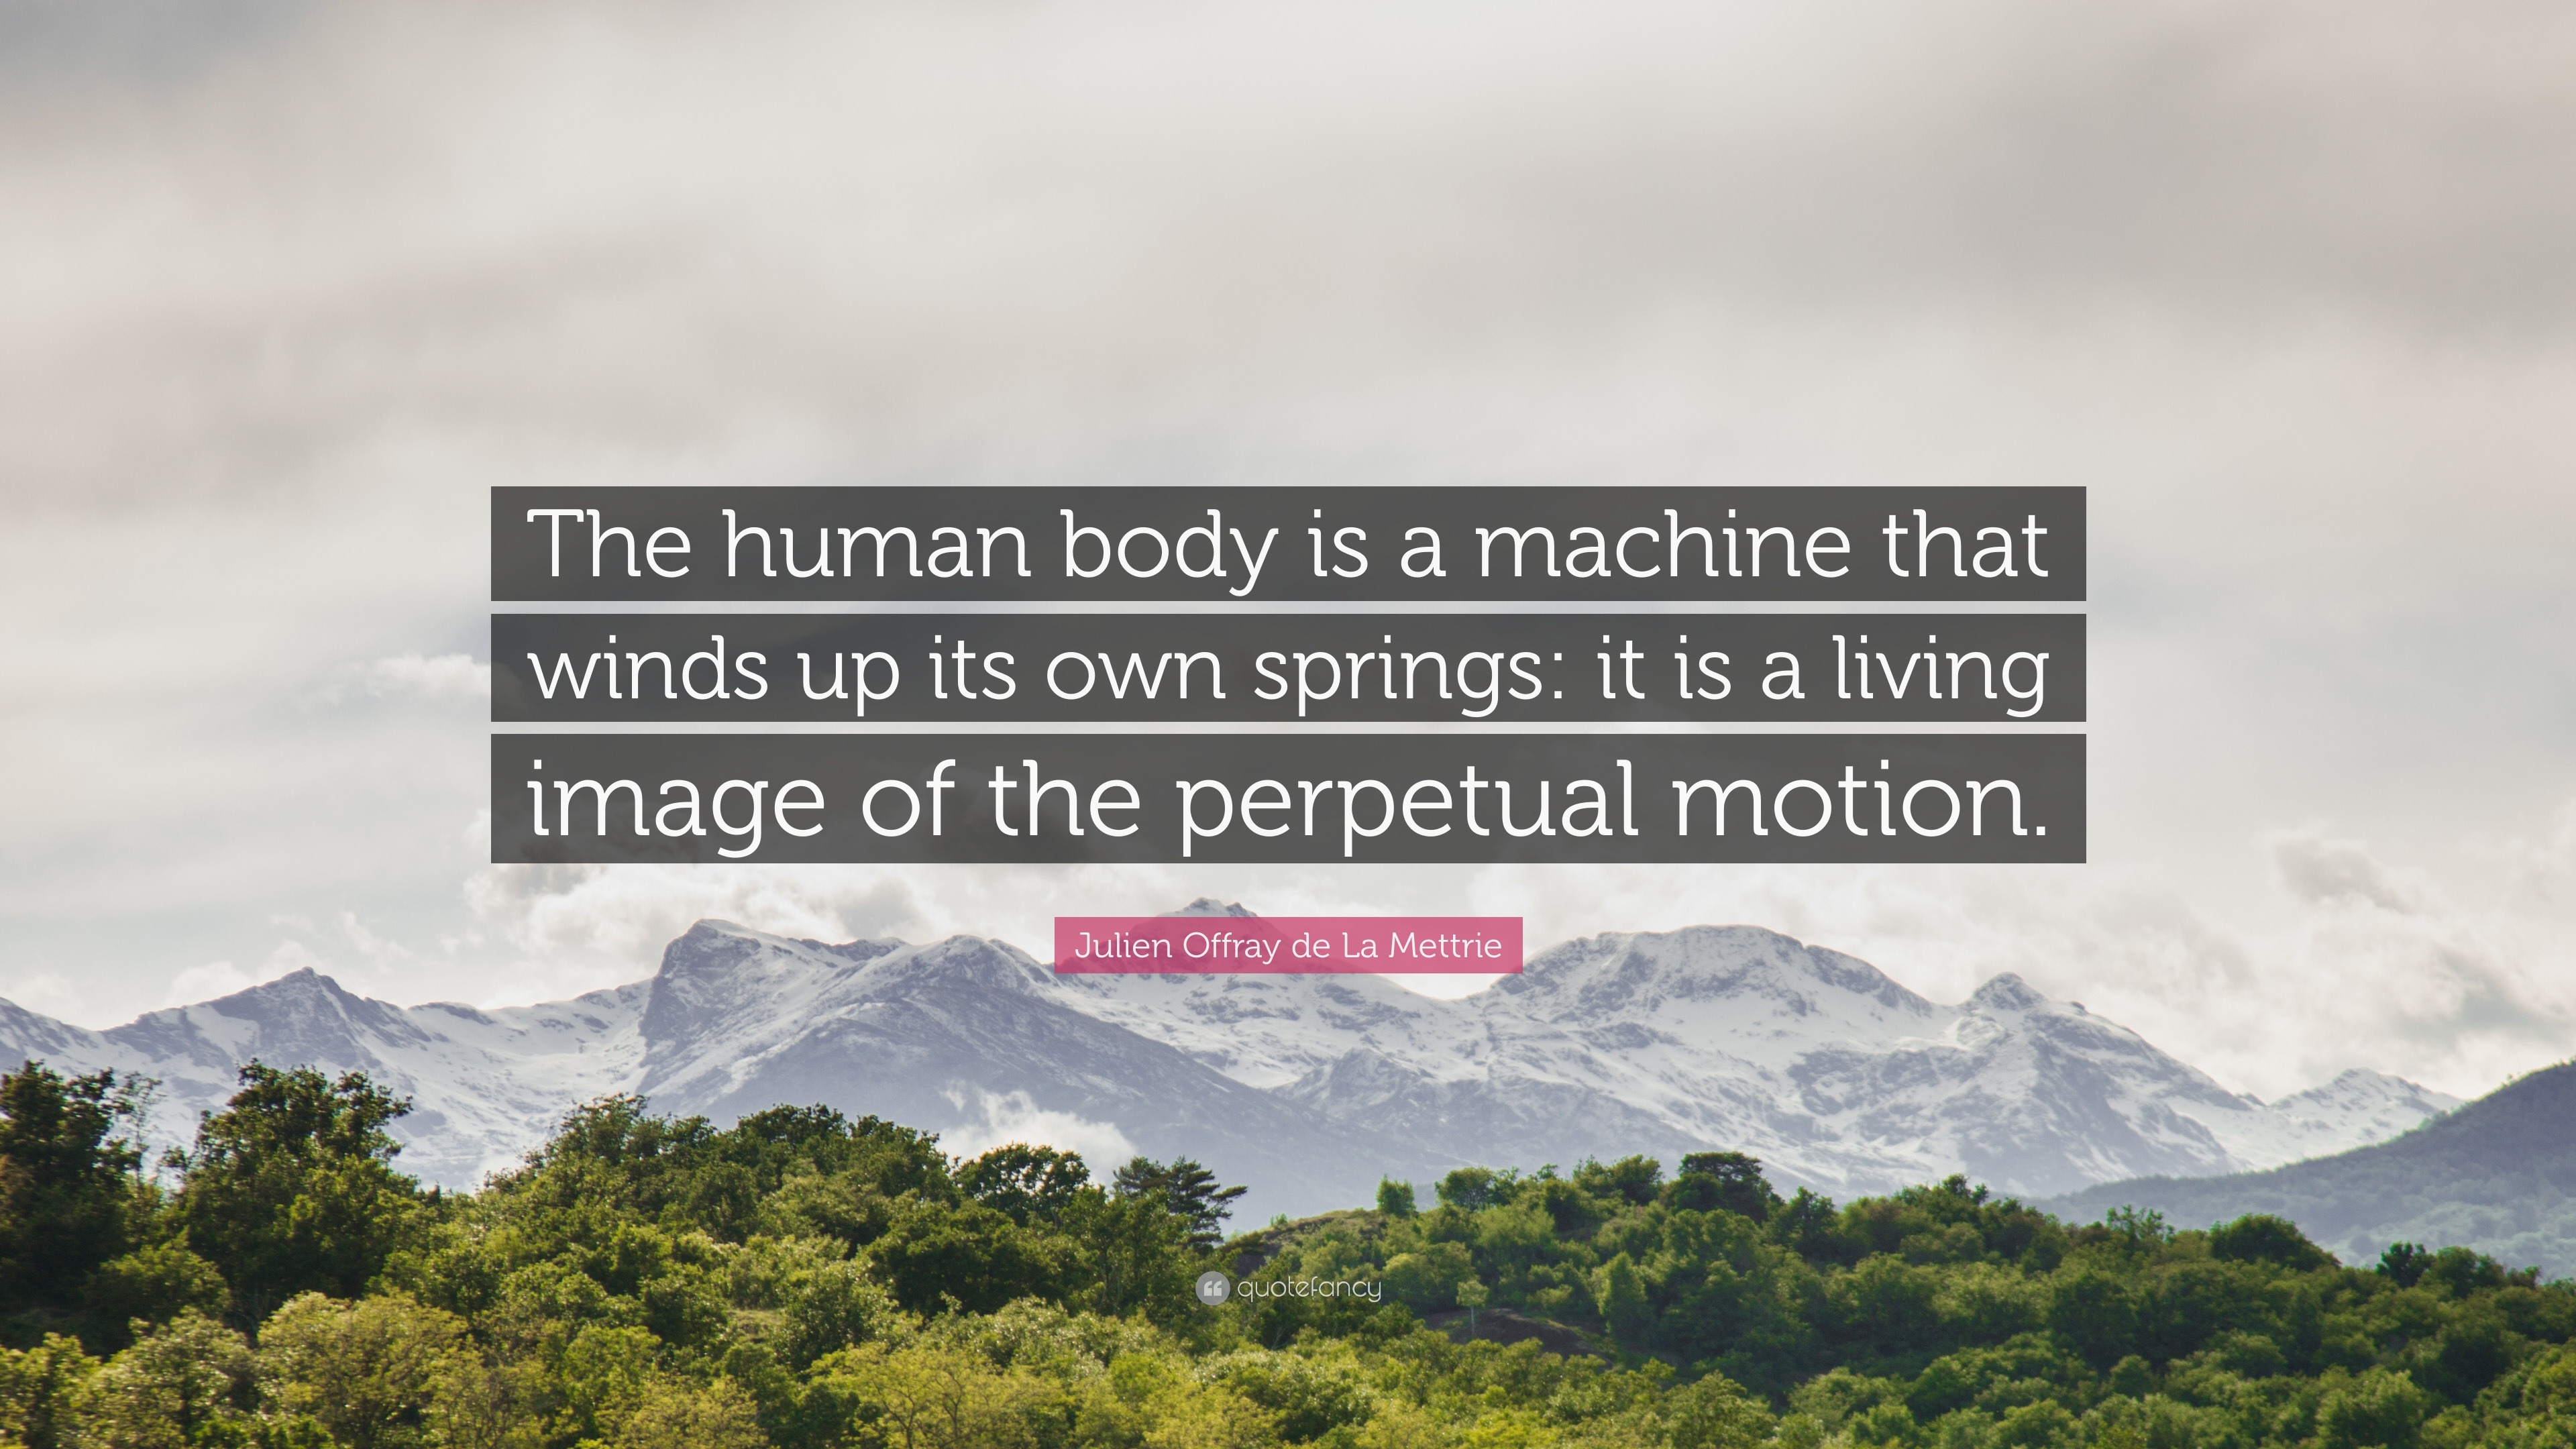 The human body is a machine